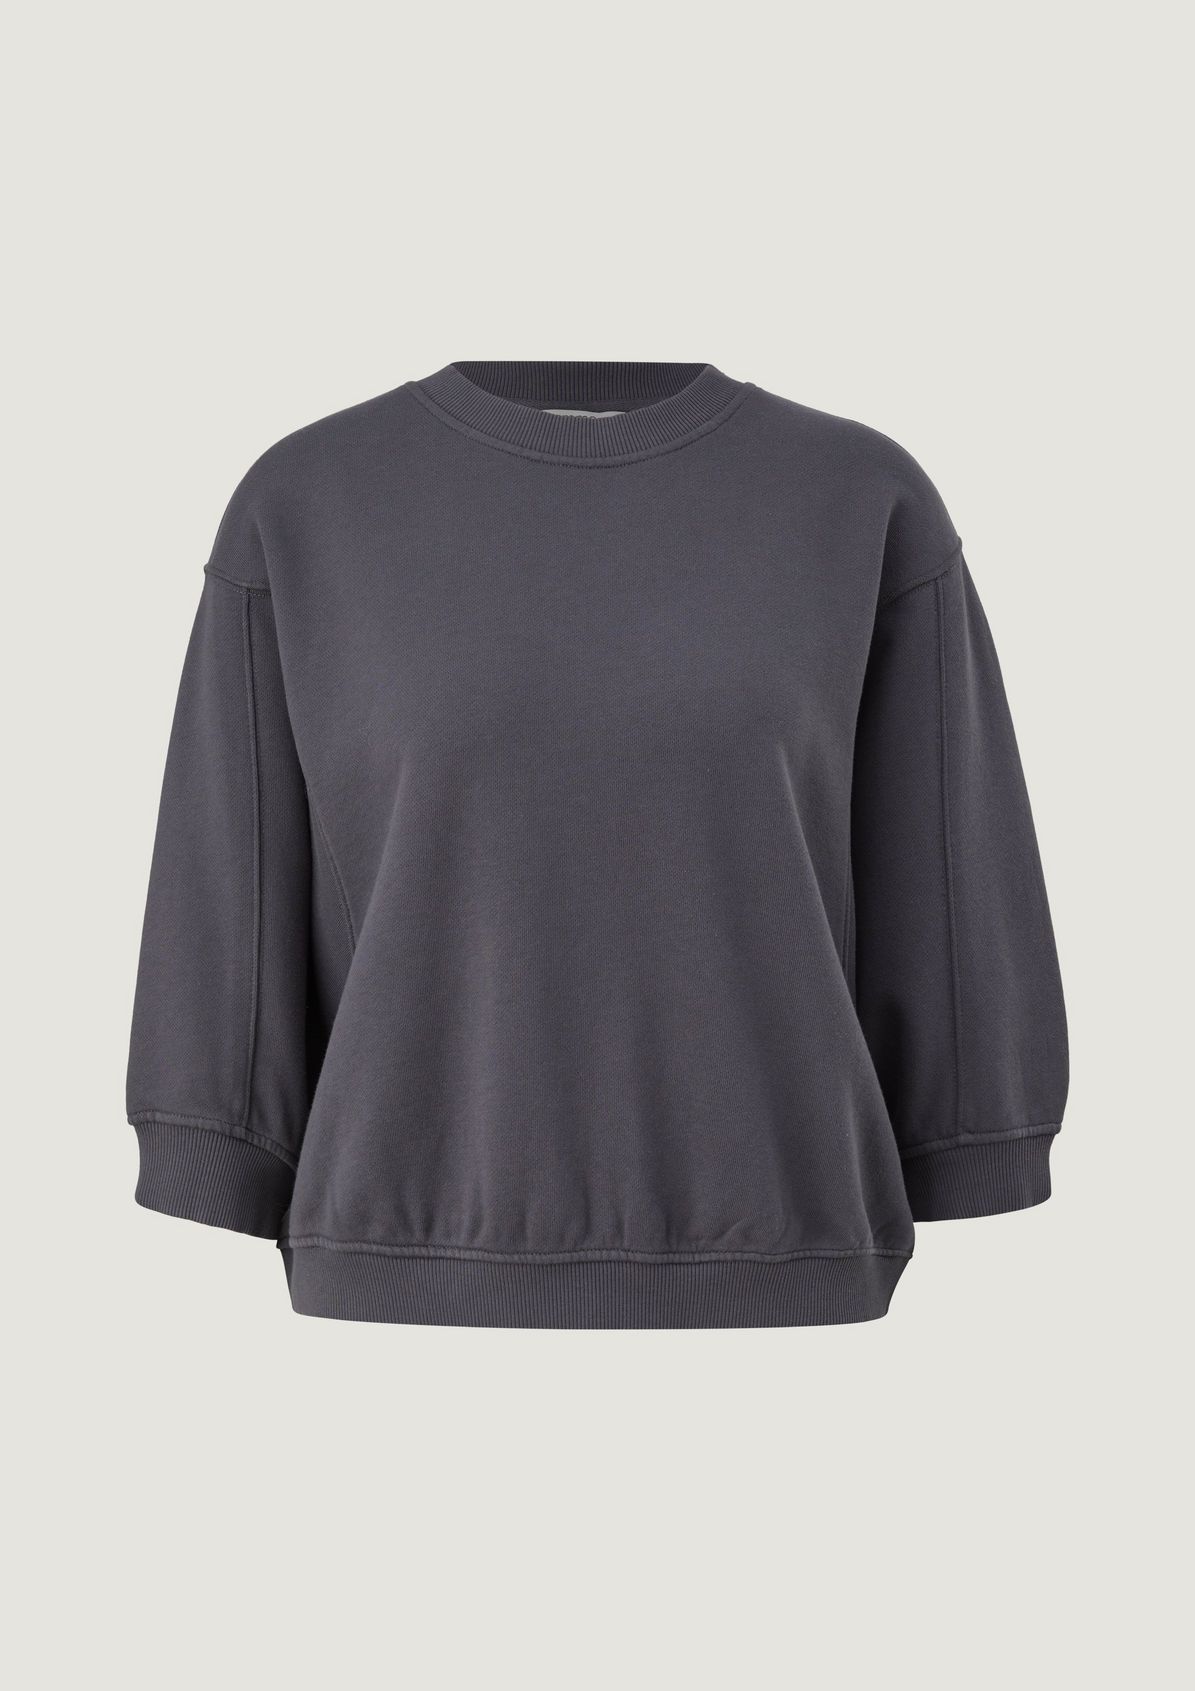 Sweatshirt with 3/4-length batwing sleeves from comma